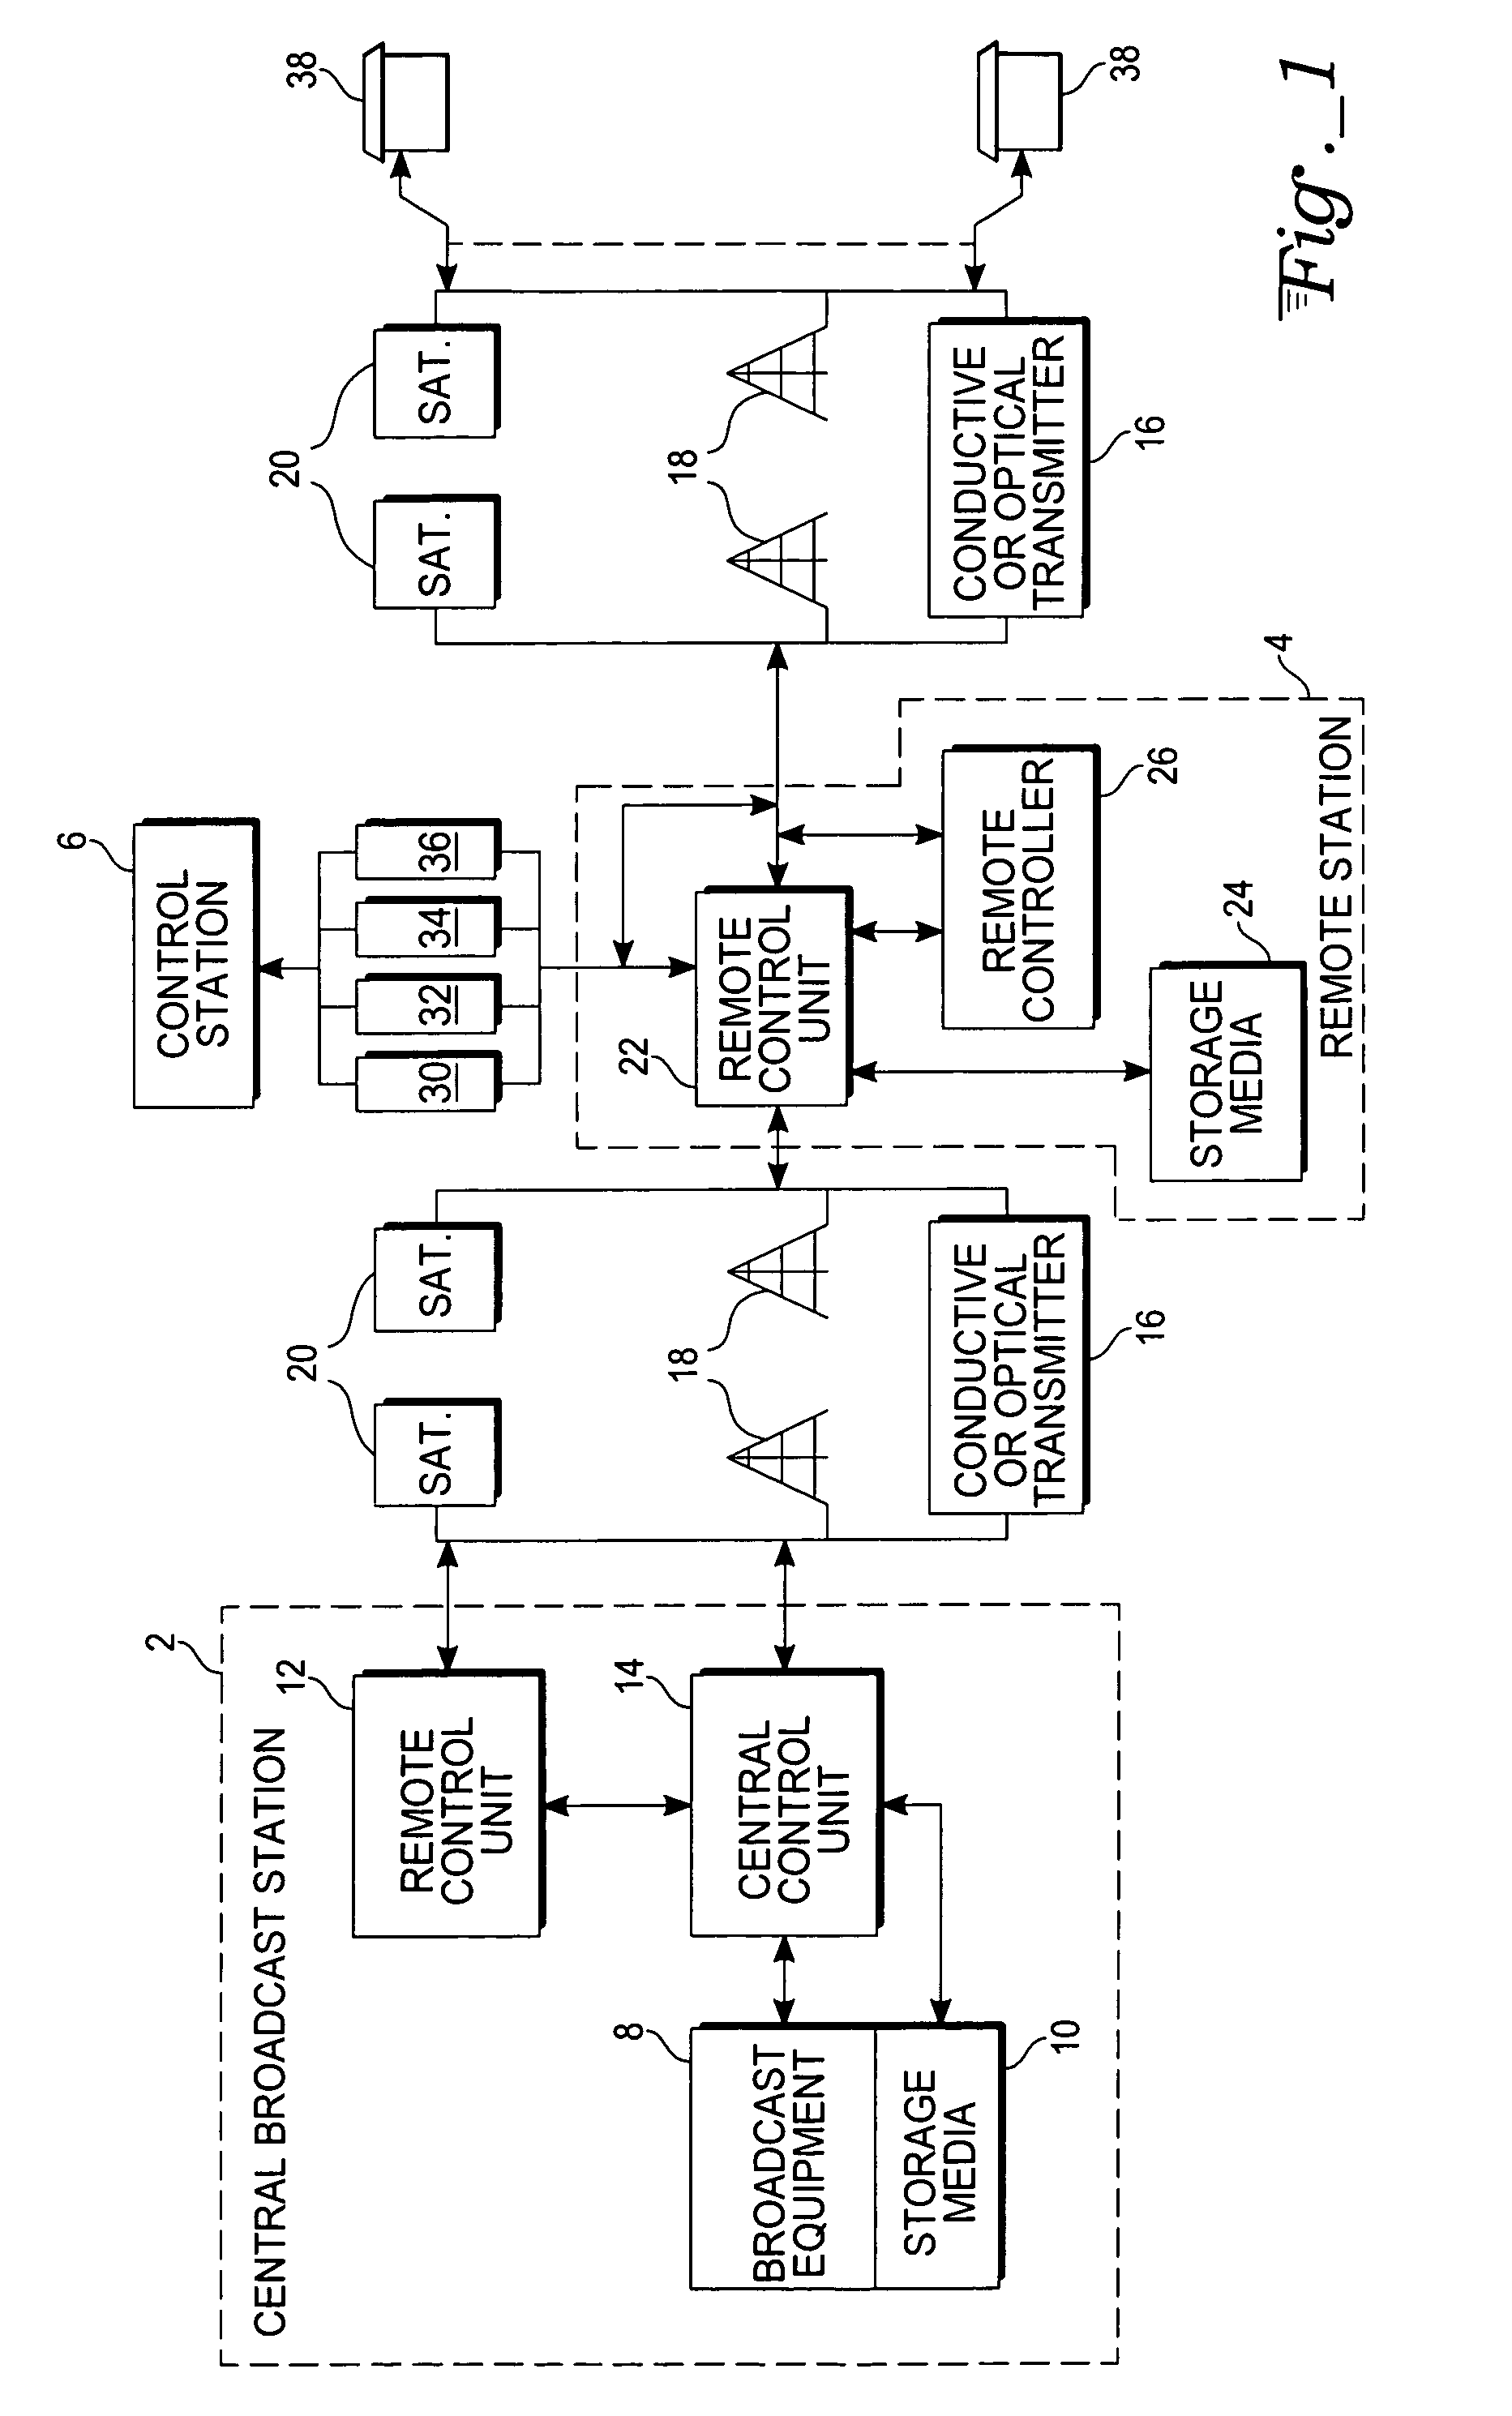 Apparatus and method for insertion of material in broadcasting